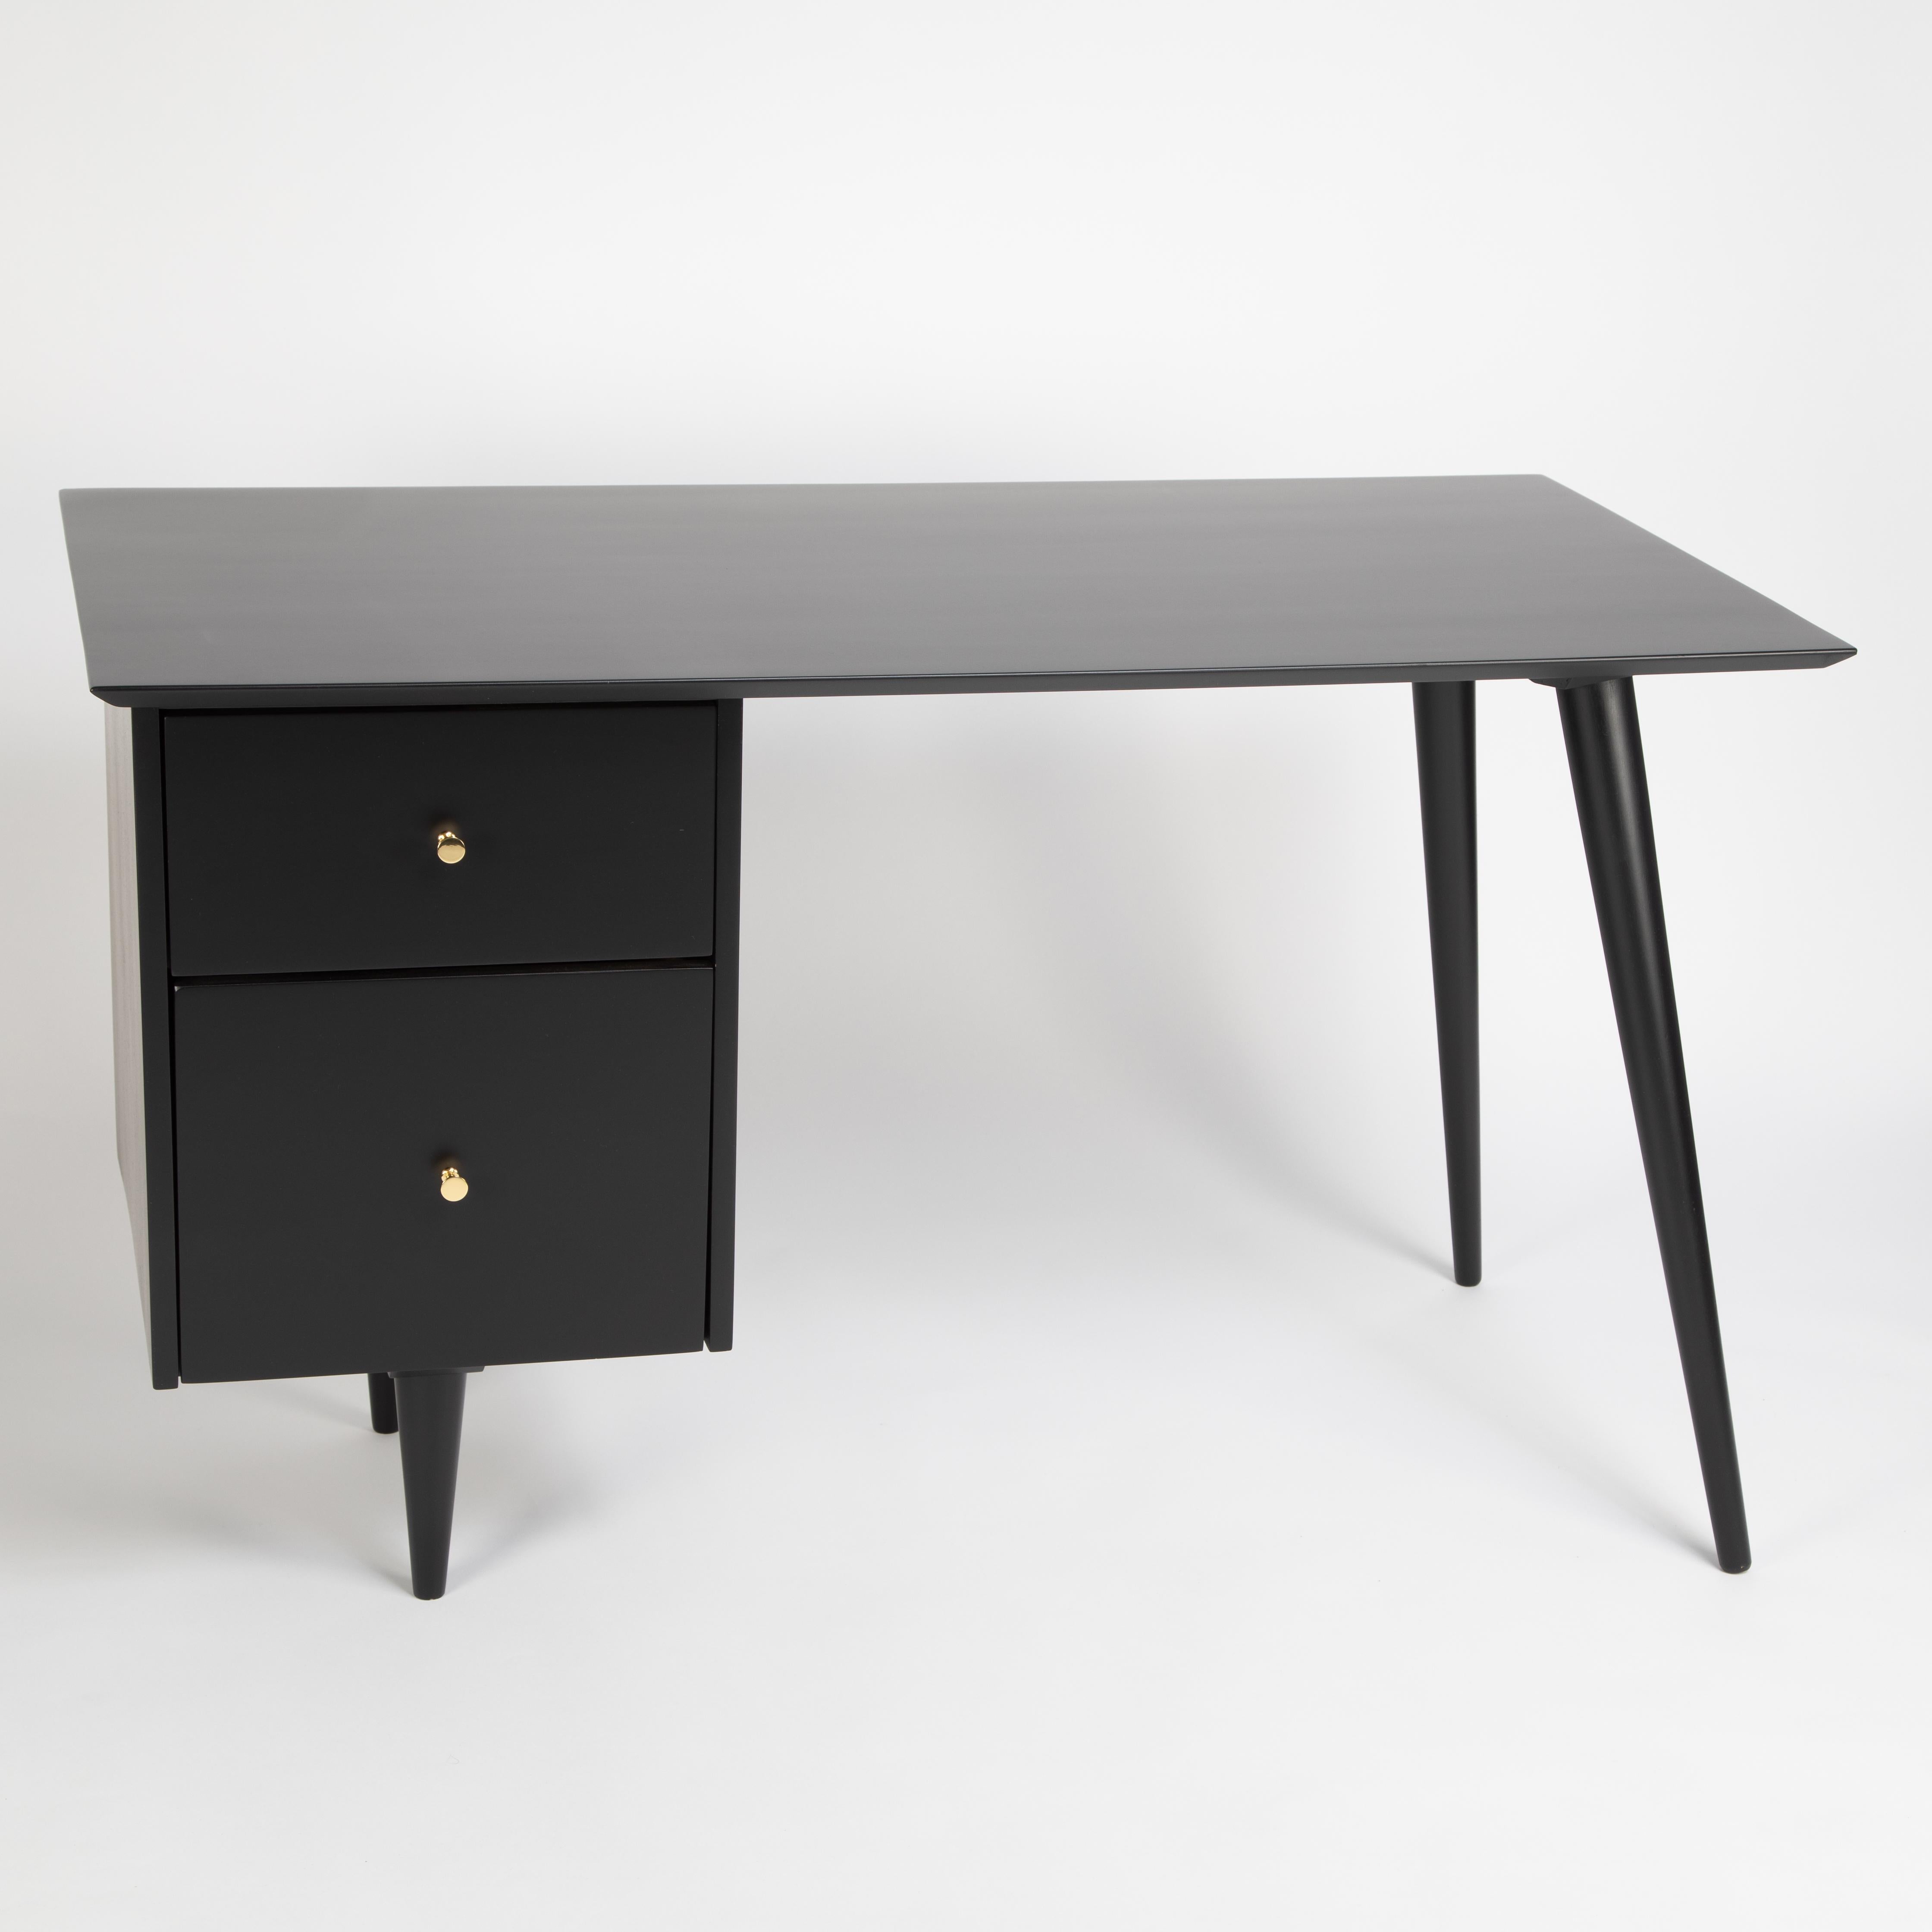 Elegant desk by American design icon Paul McCobb, produced for his Planner Group collection for Winchendon Furniture, circa 1950s. This piece is constructed of solid maple and features McCobb's signature tapered splayed legs and conical pulls in